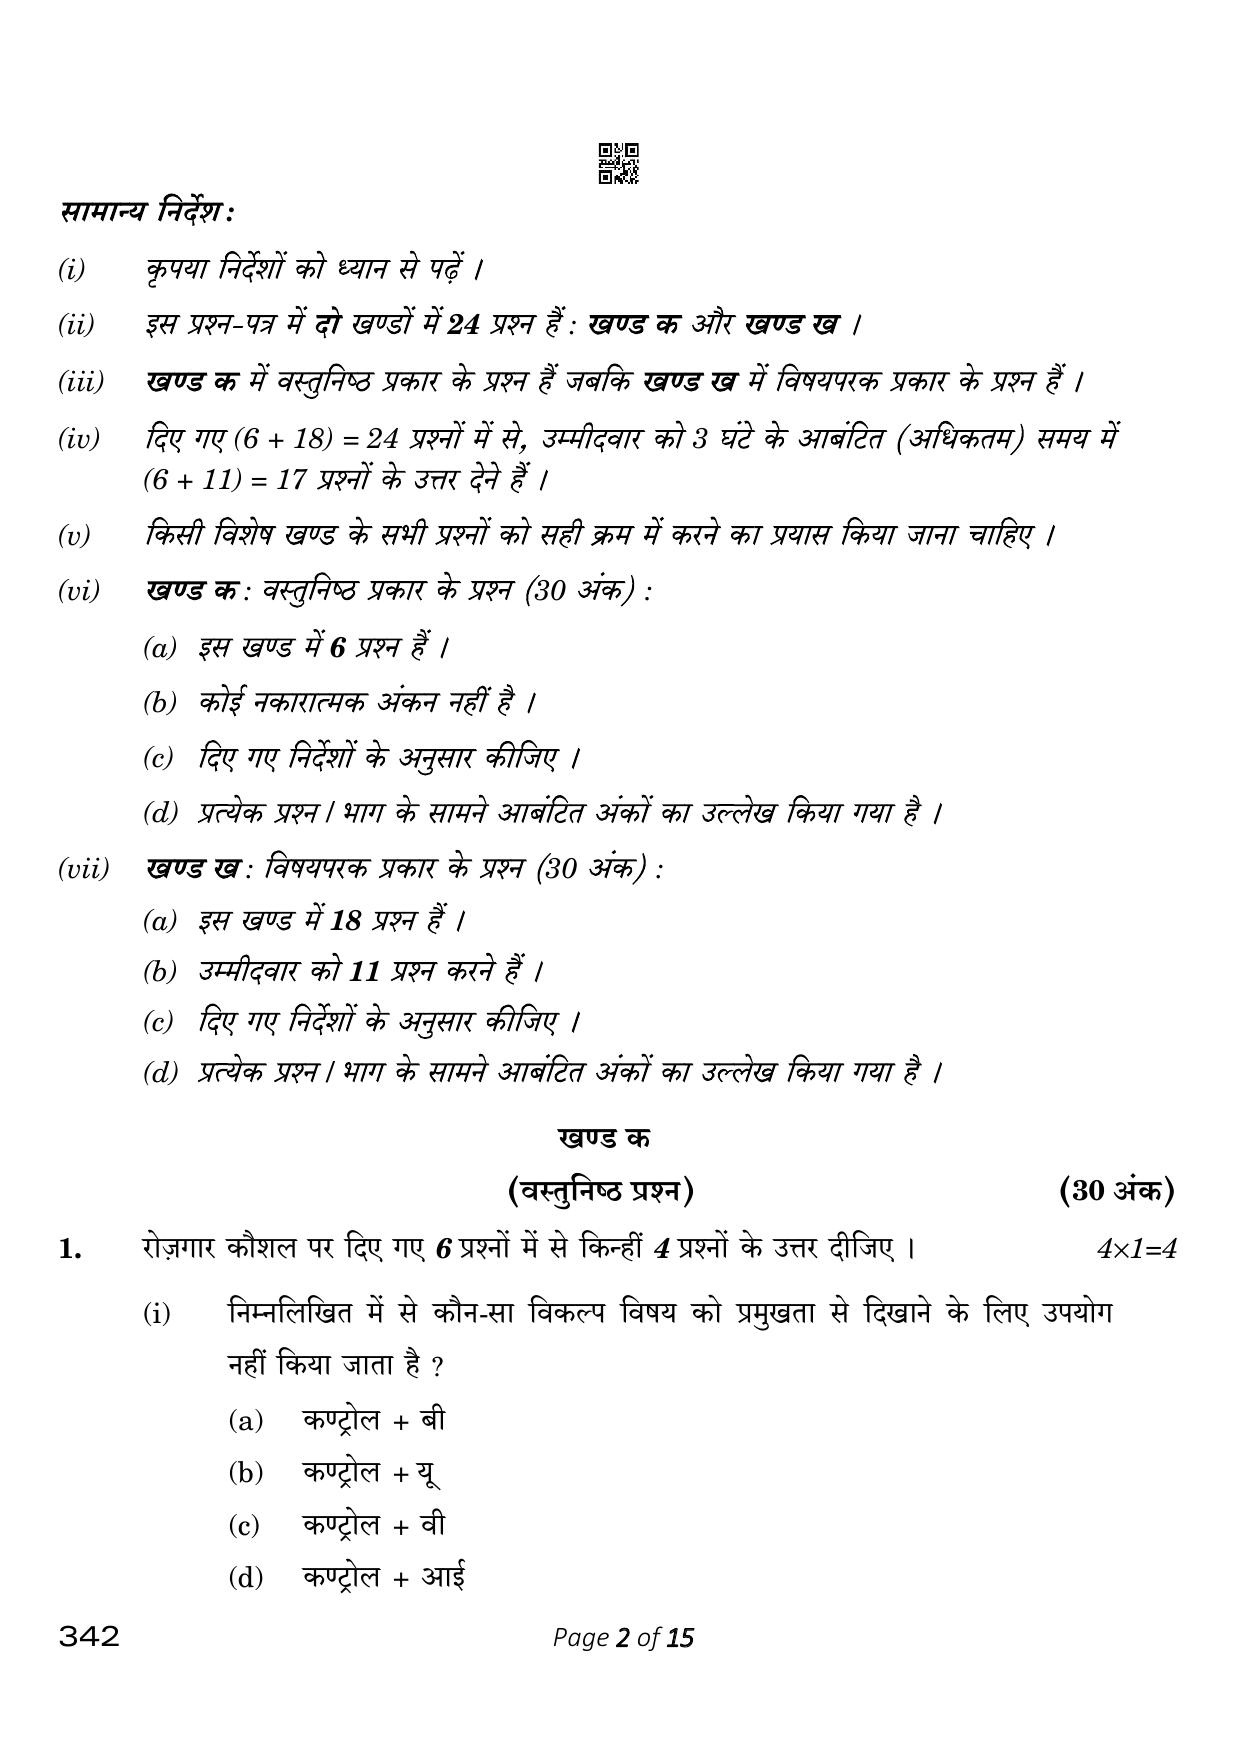 CBSE Class 12 342_Geospatial Technology 2023 Question Paper - Page 2